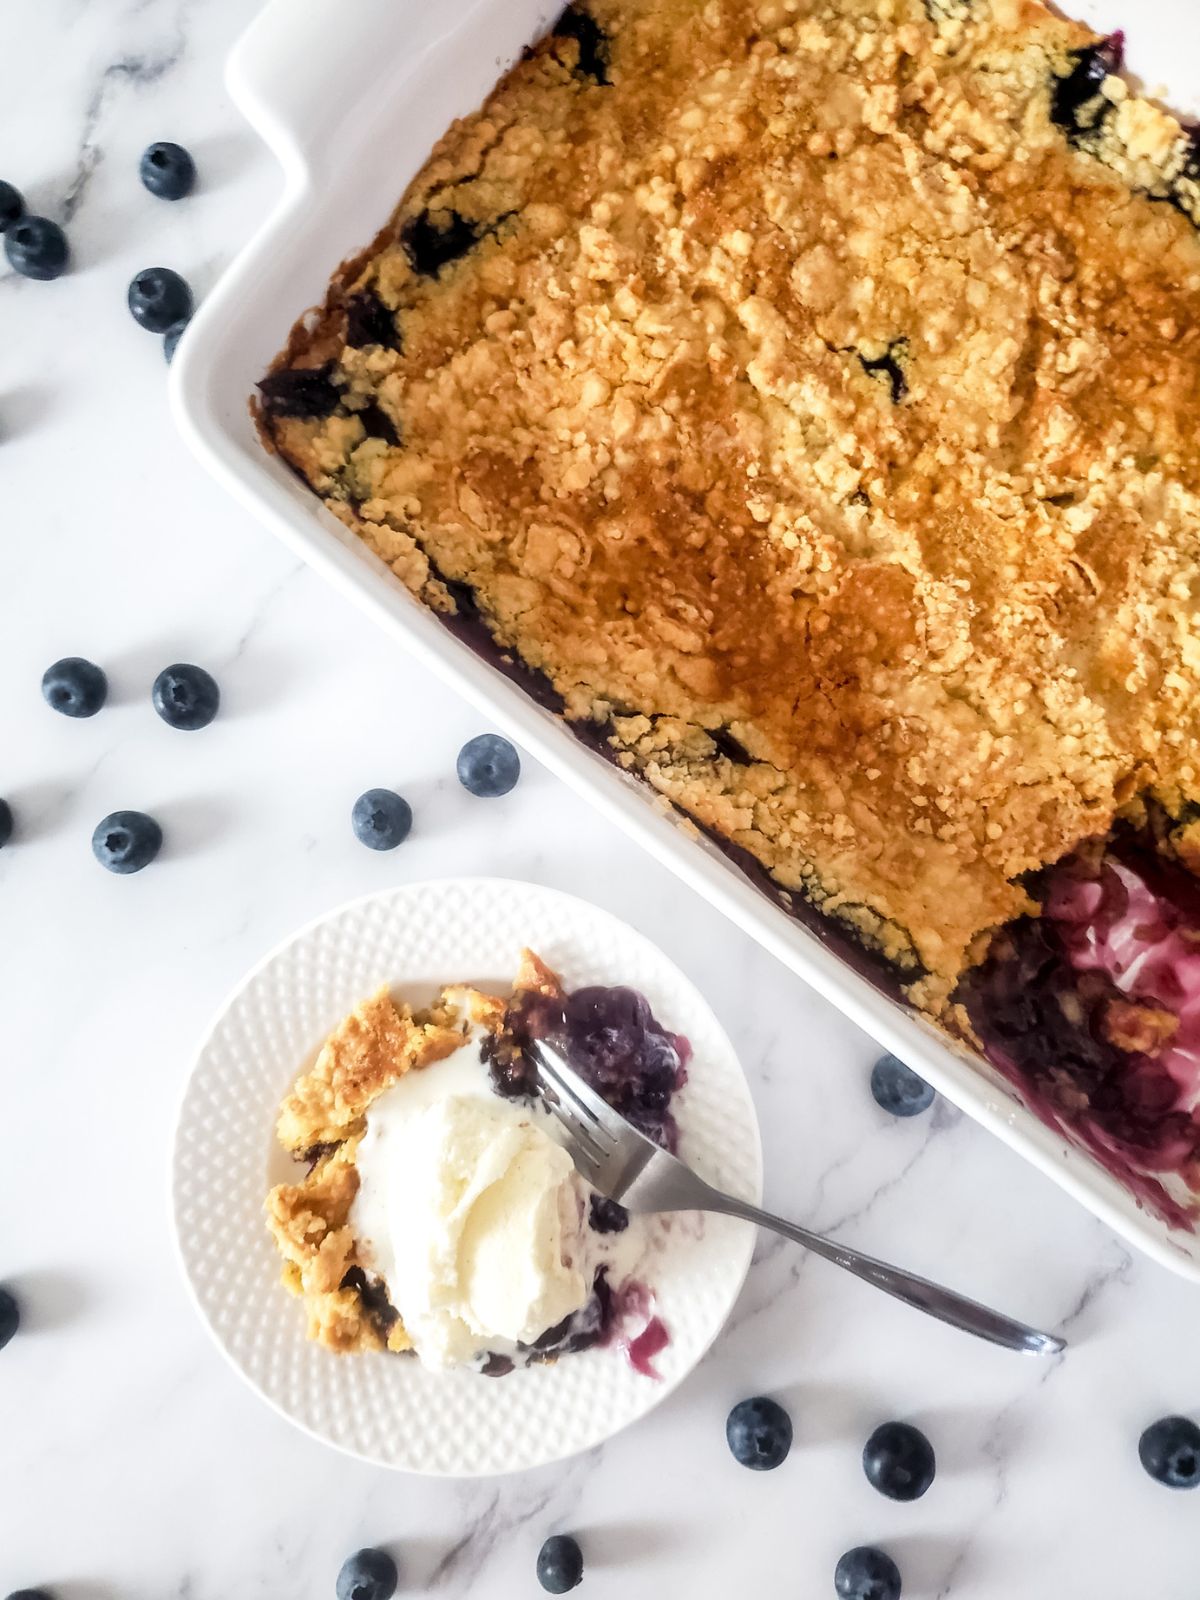 blueberry crunch with cake mix.